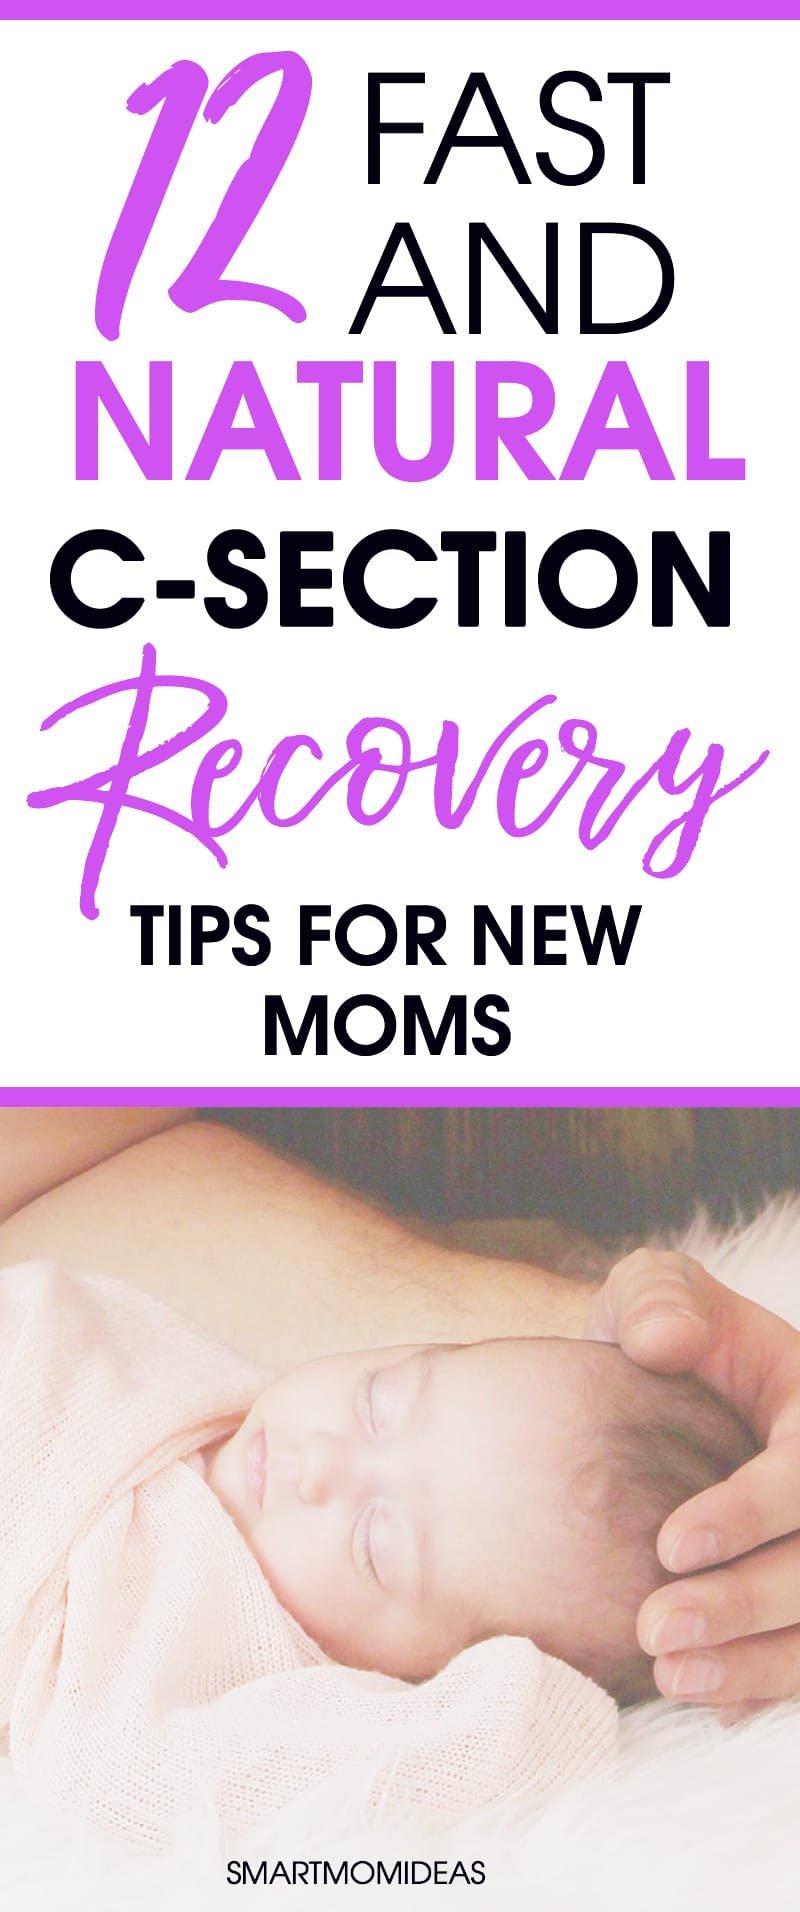 12 Fast and Natural C-Section Recovery Tips for Brand New Moms